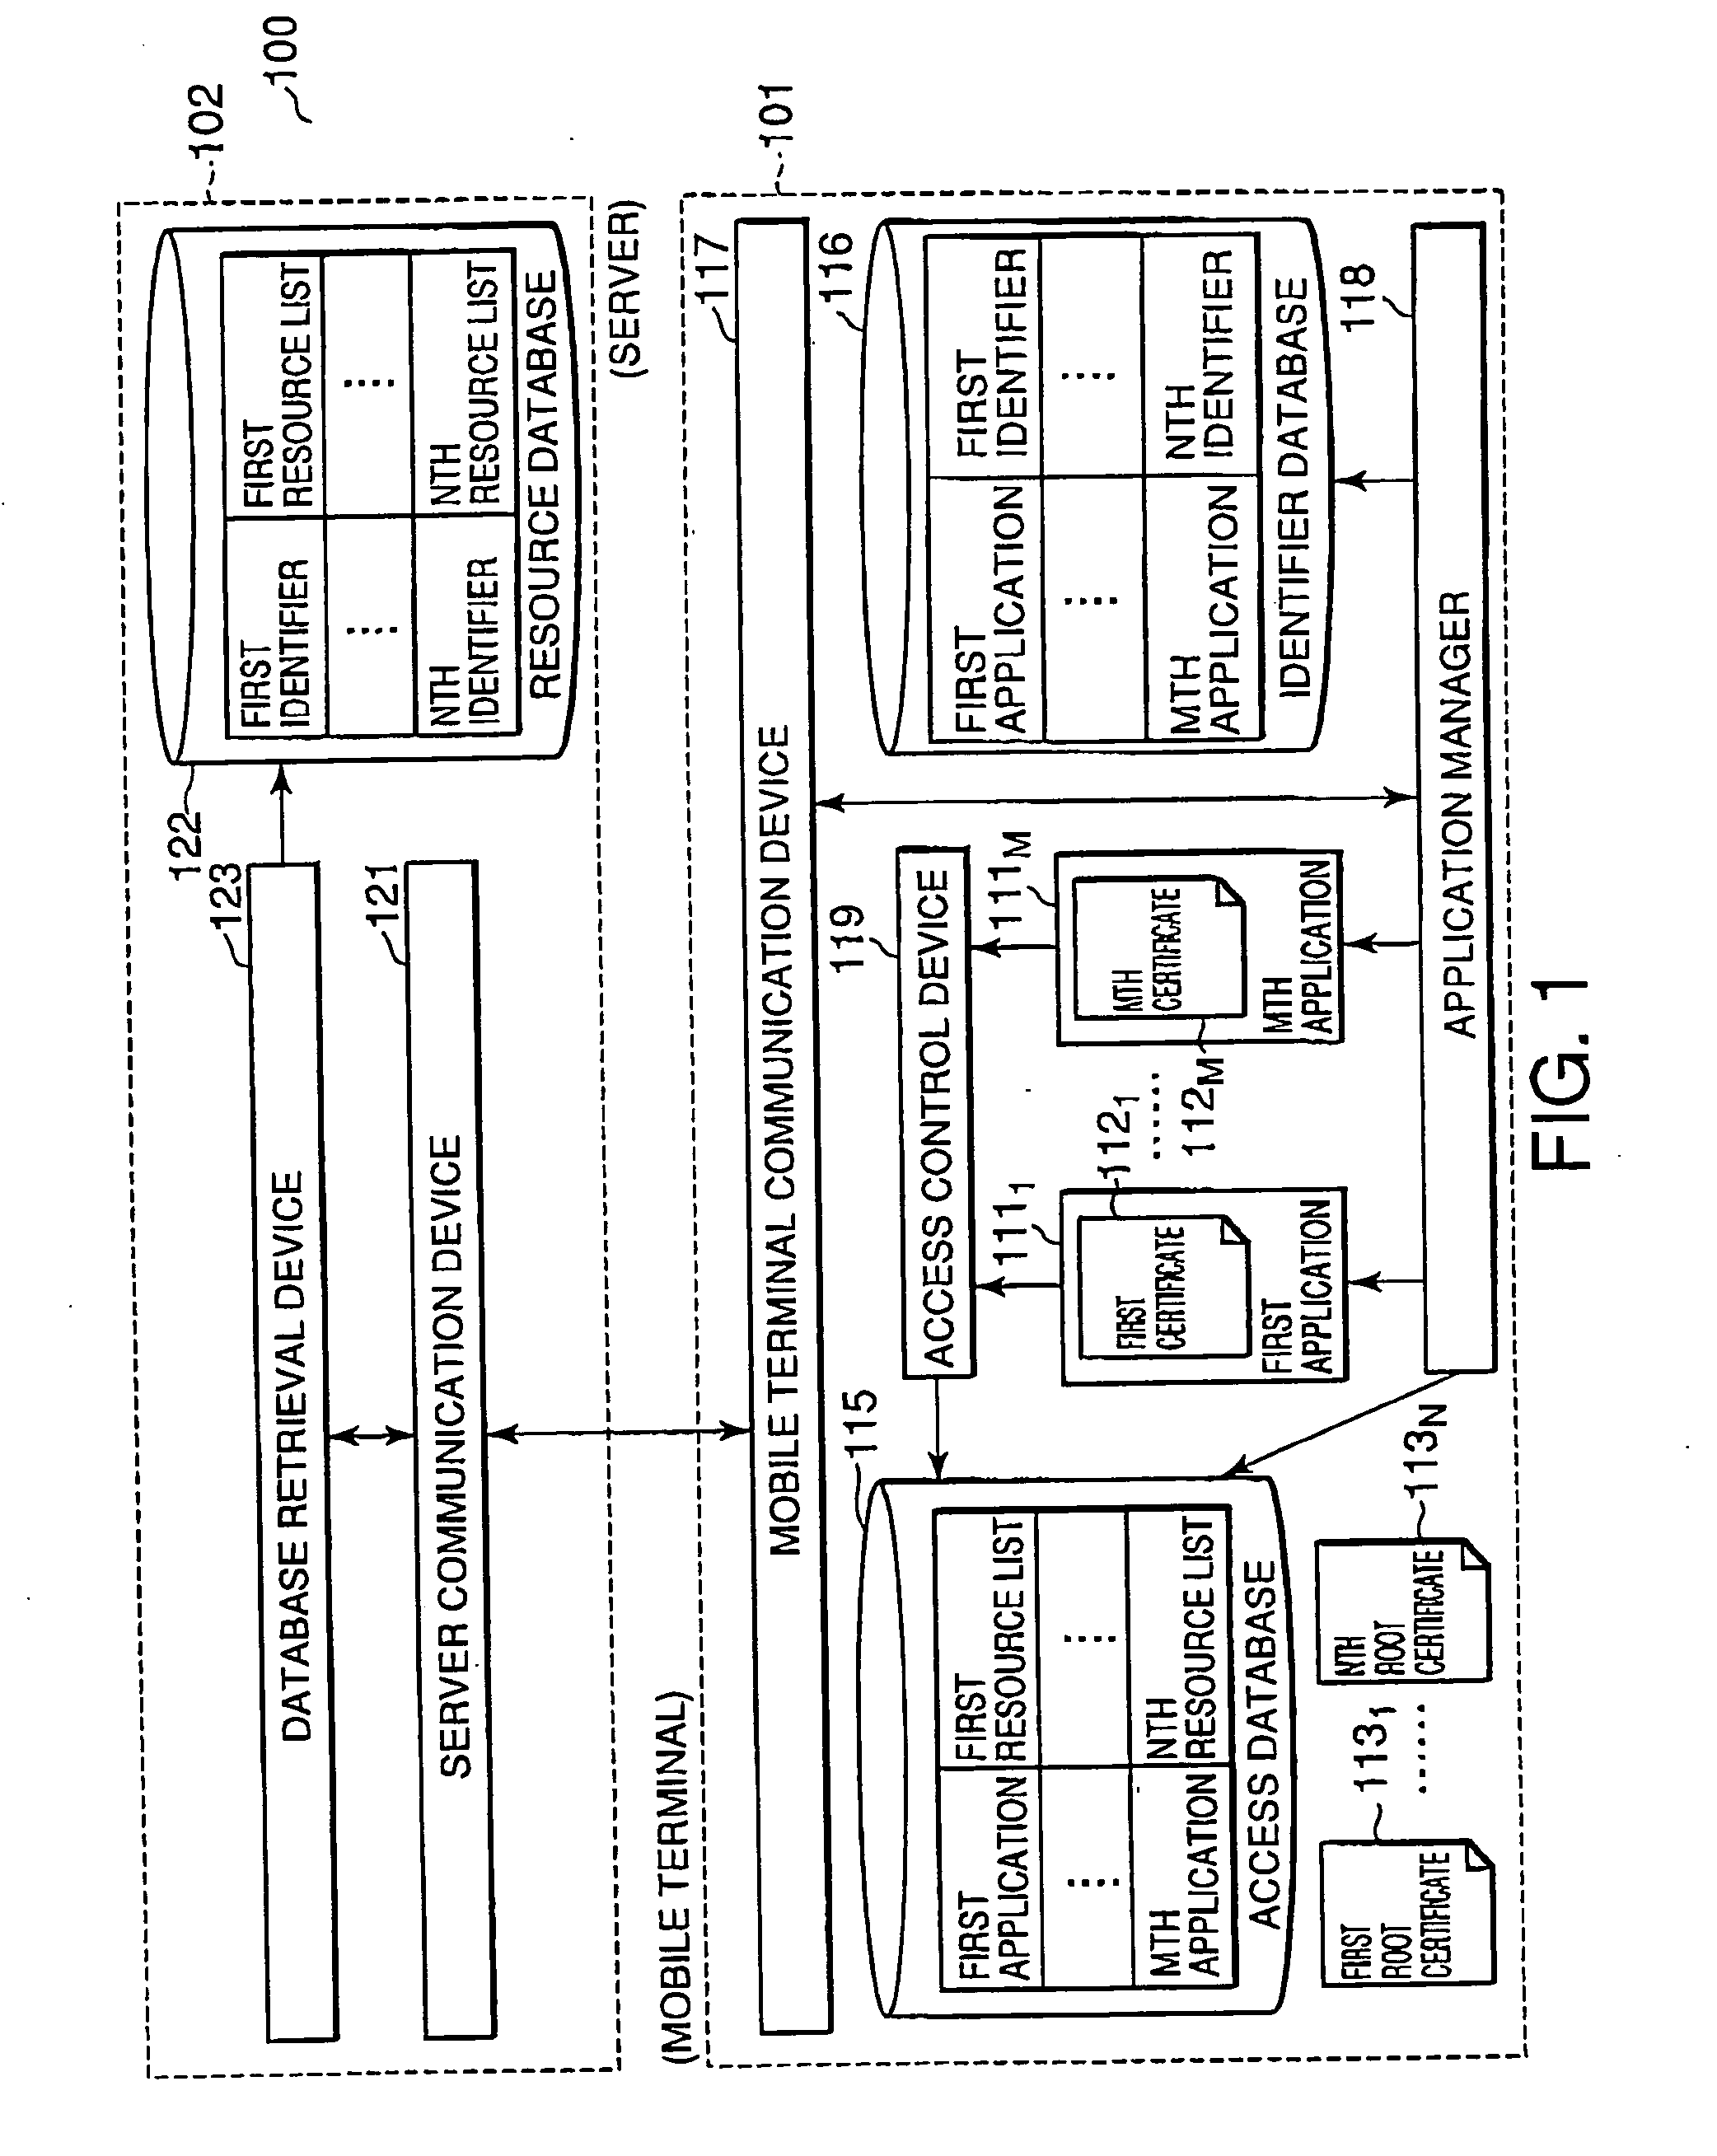 Mobile terminal, resource access control system for mobile terminal, and resource access control method in mobile terminal